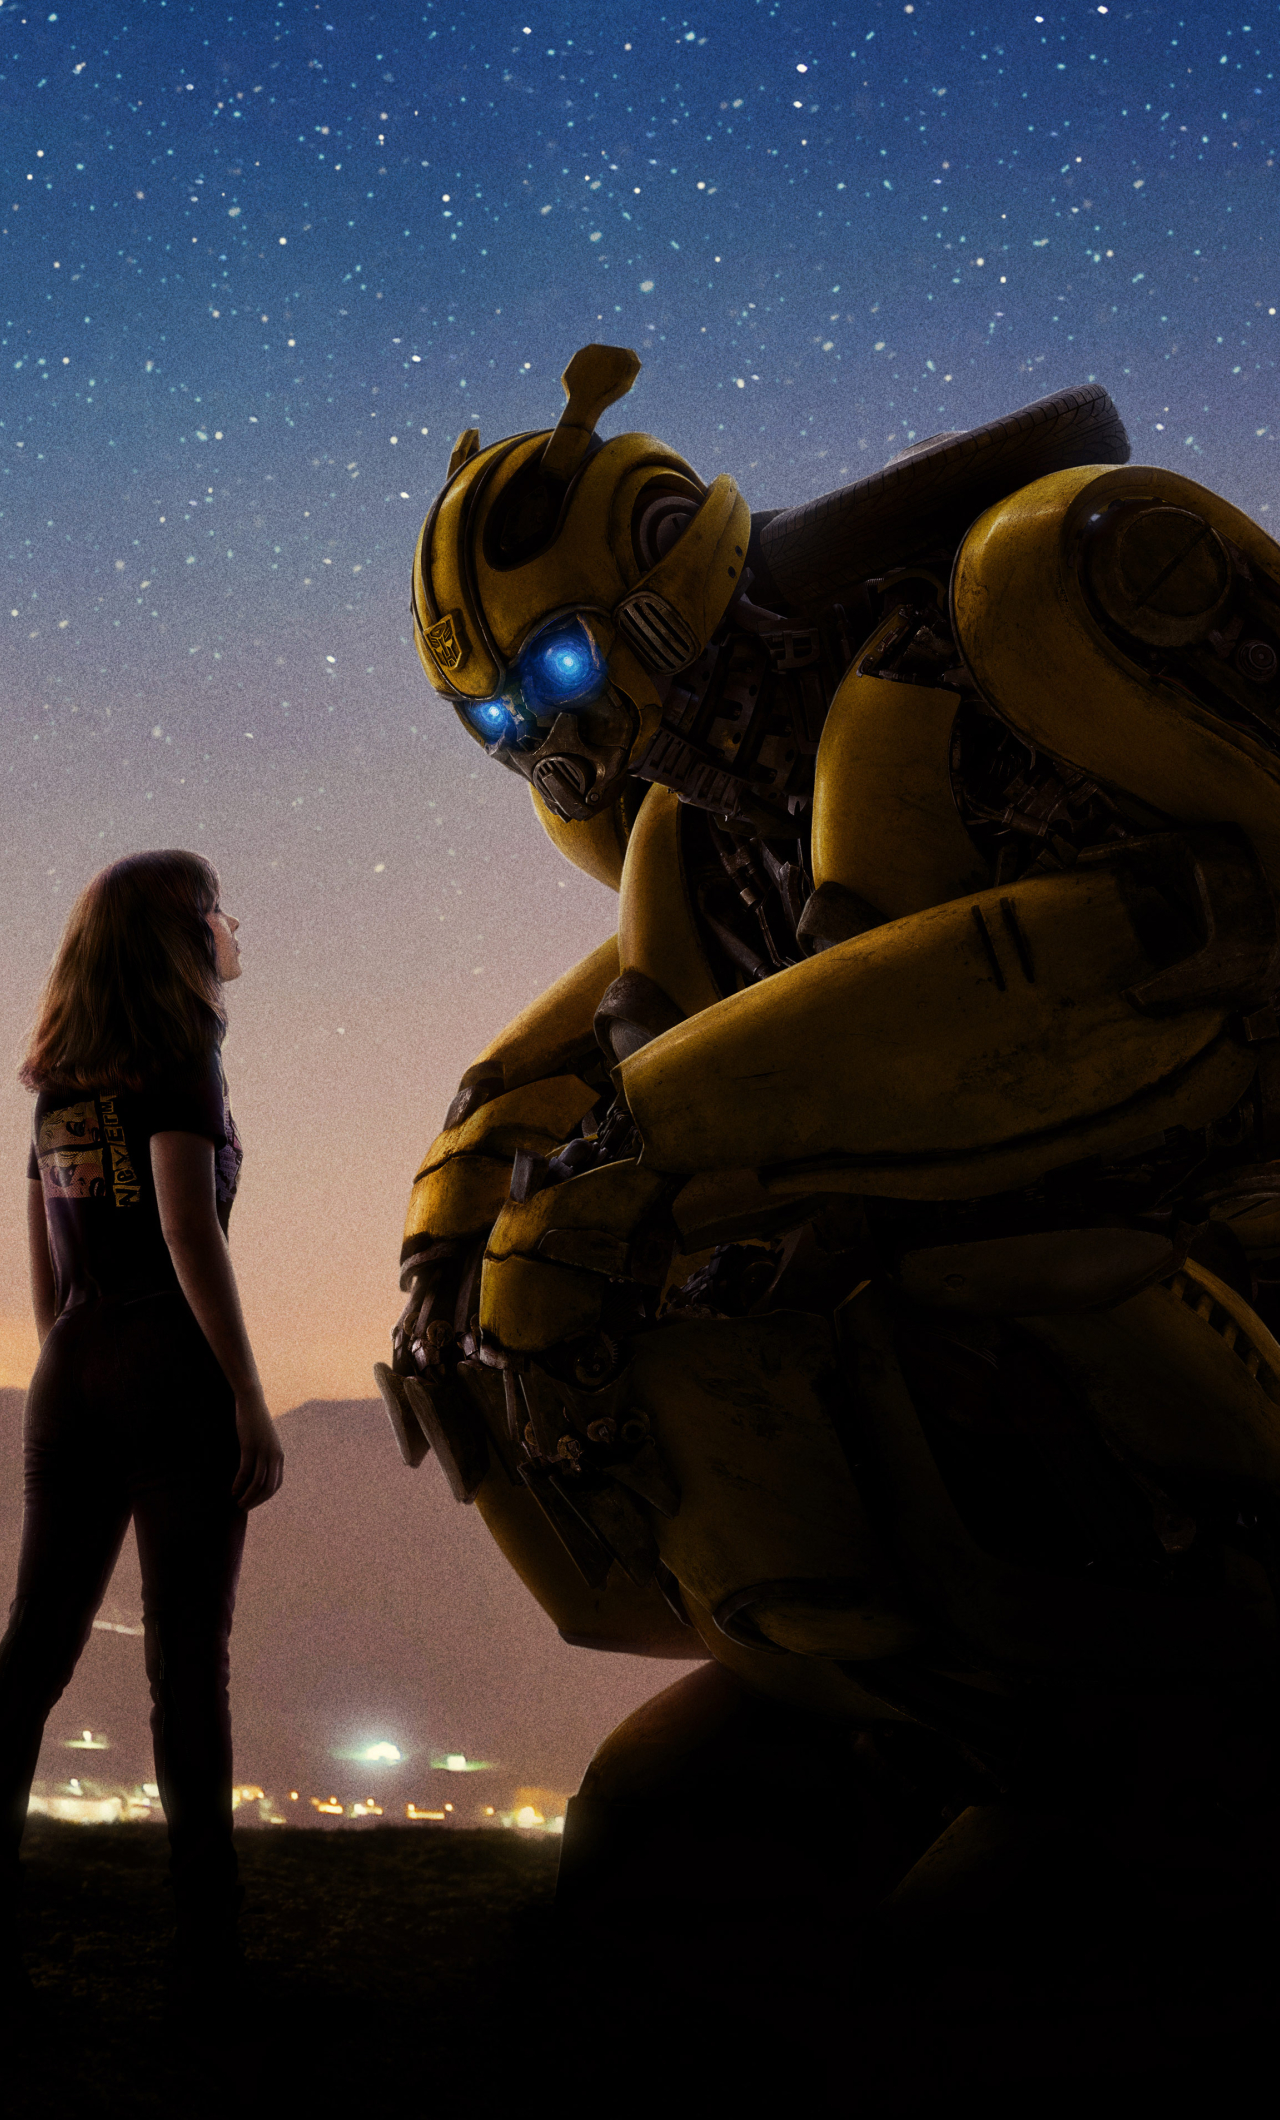 Bumblebee 2018 Movie Official Poster, HD 8K Wallpaper